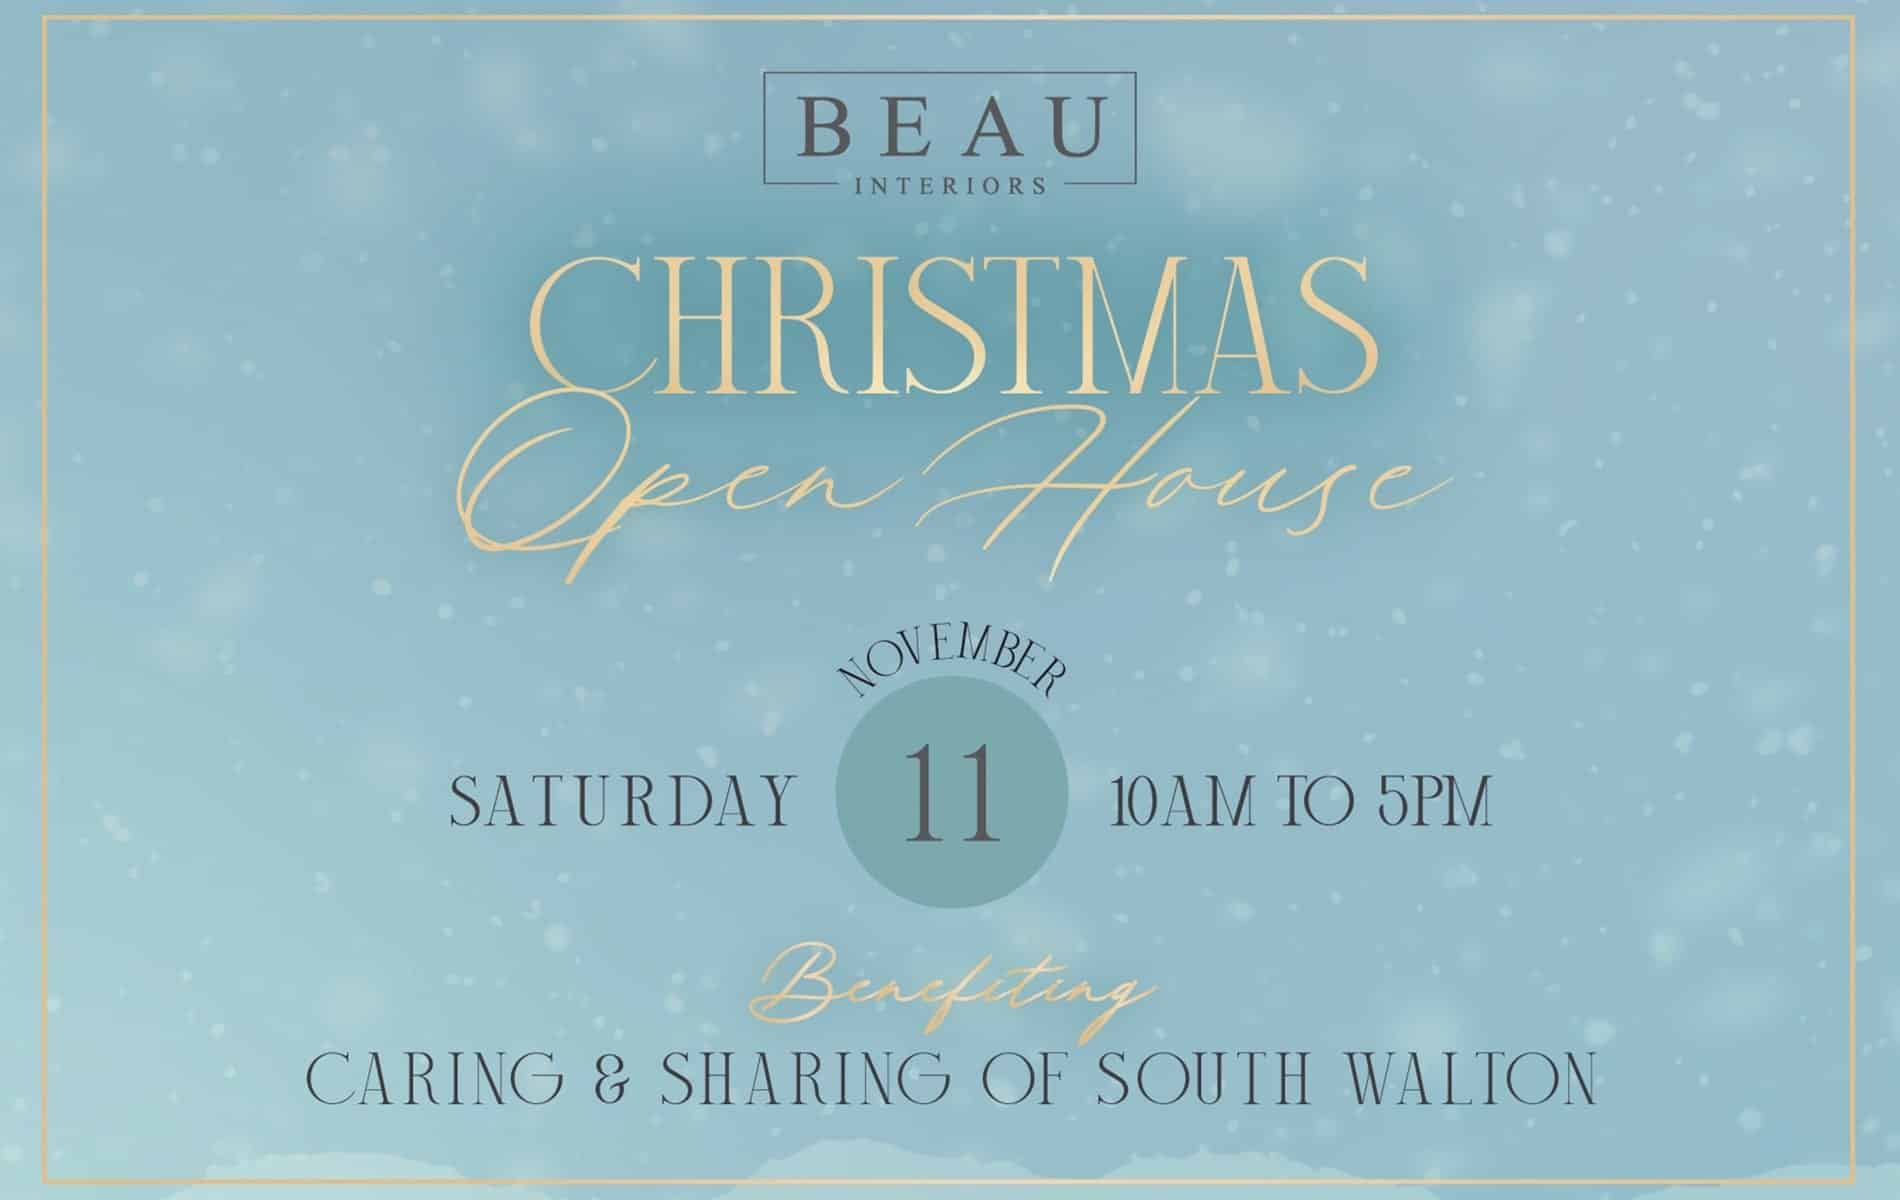 Beau Interiors Rings in the Holidays with Their Annual Christmas Open House